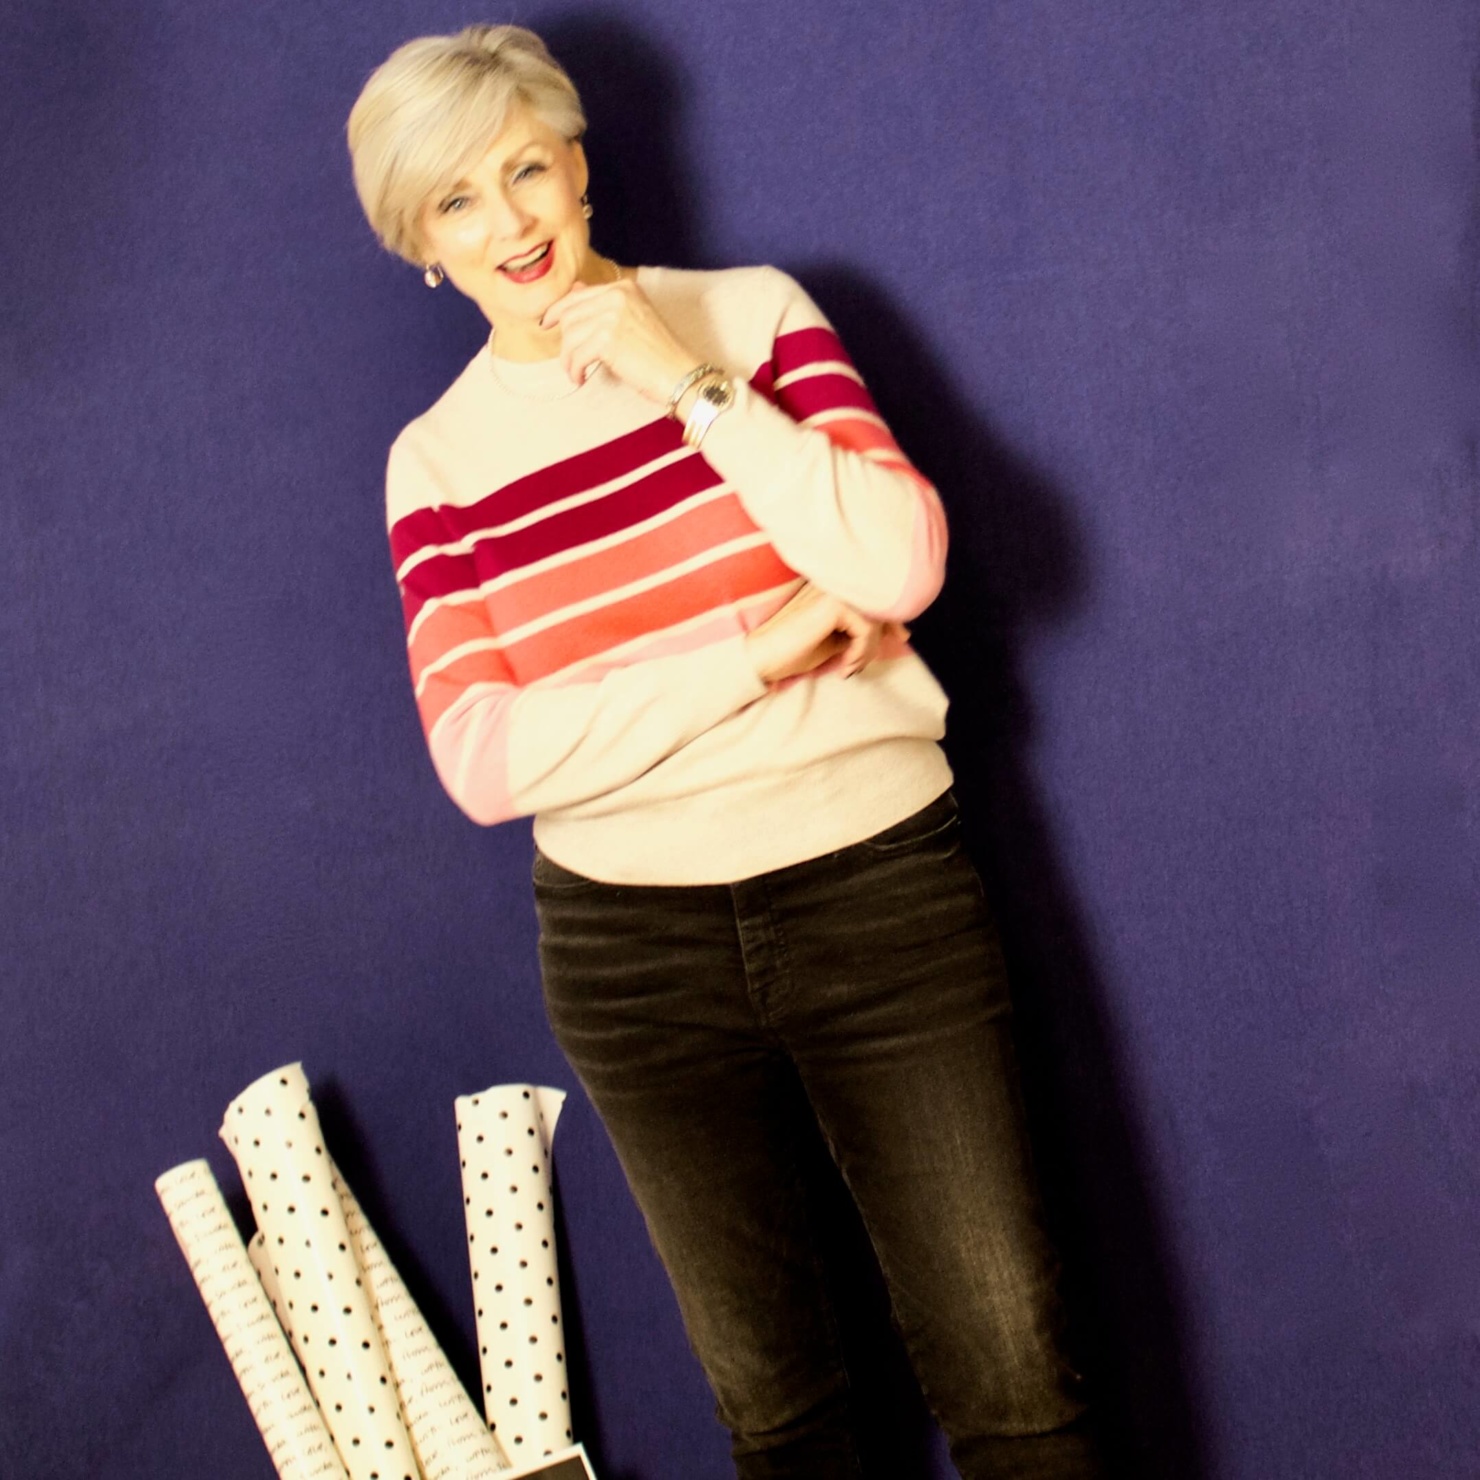 beth from Style at a Certain Age wears a striped cashmere crewneck from Marks & Spencer